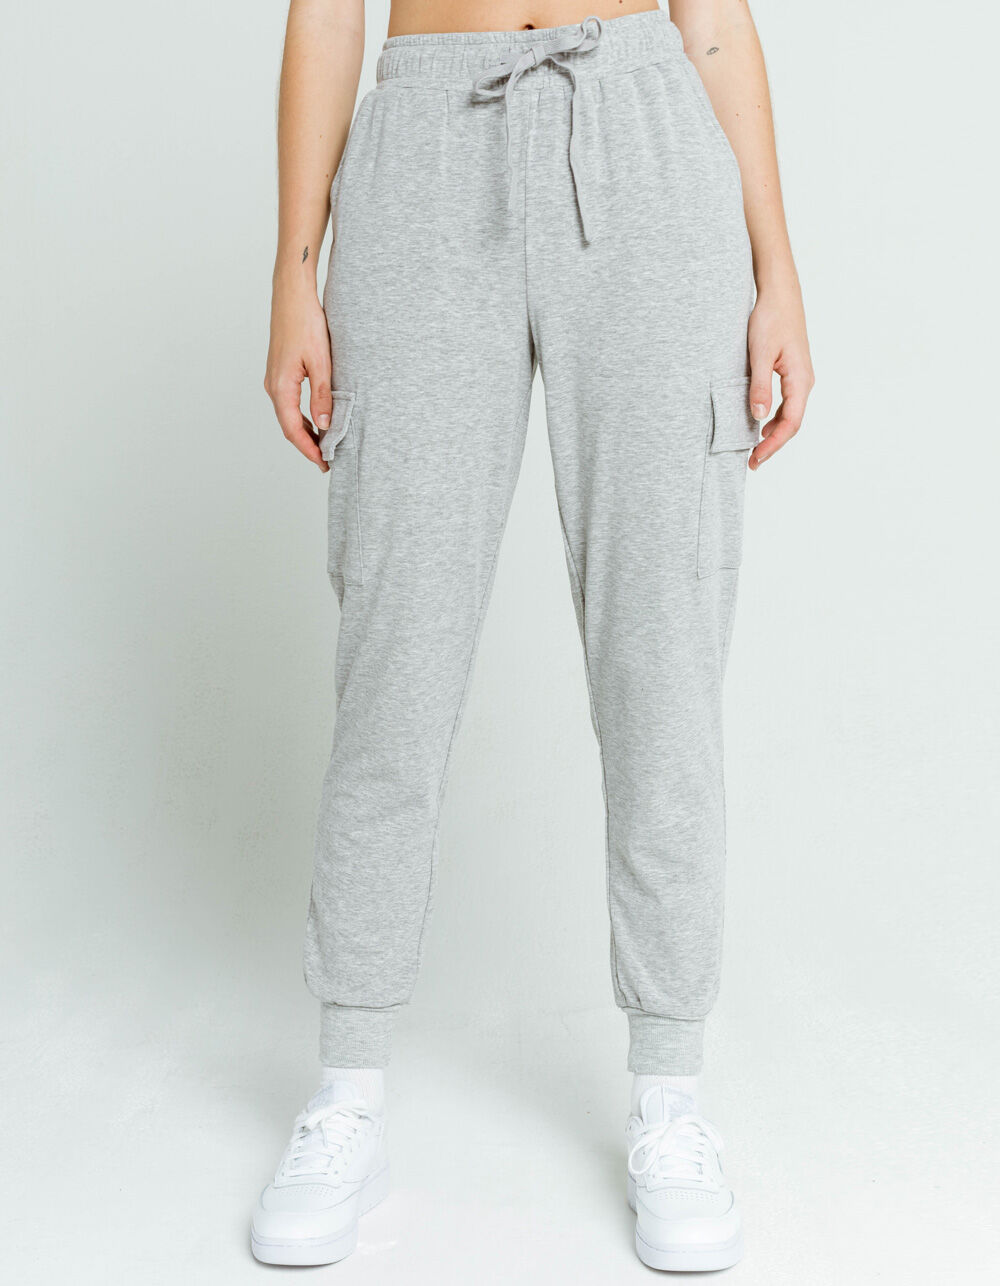 SKY AND SPARROW Cargo Womens Heather Gray Jogger Sweatpants - HEATHER ...